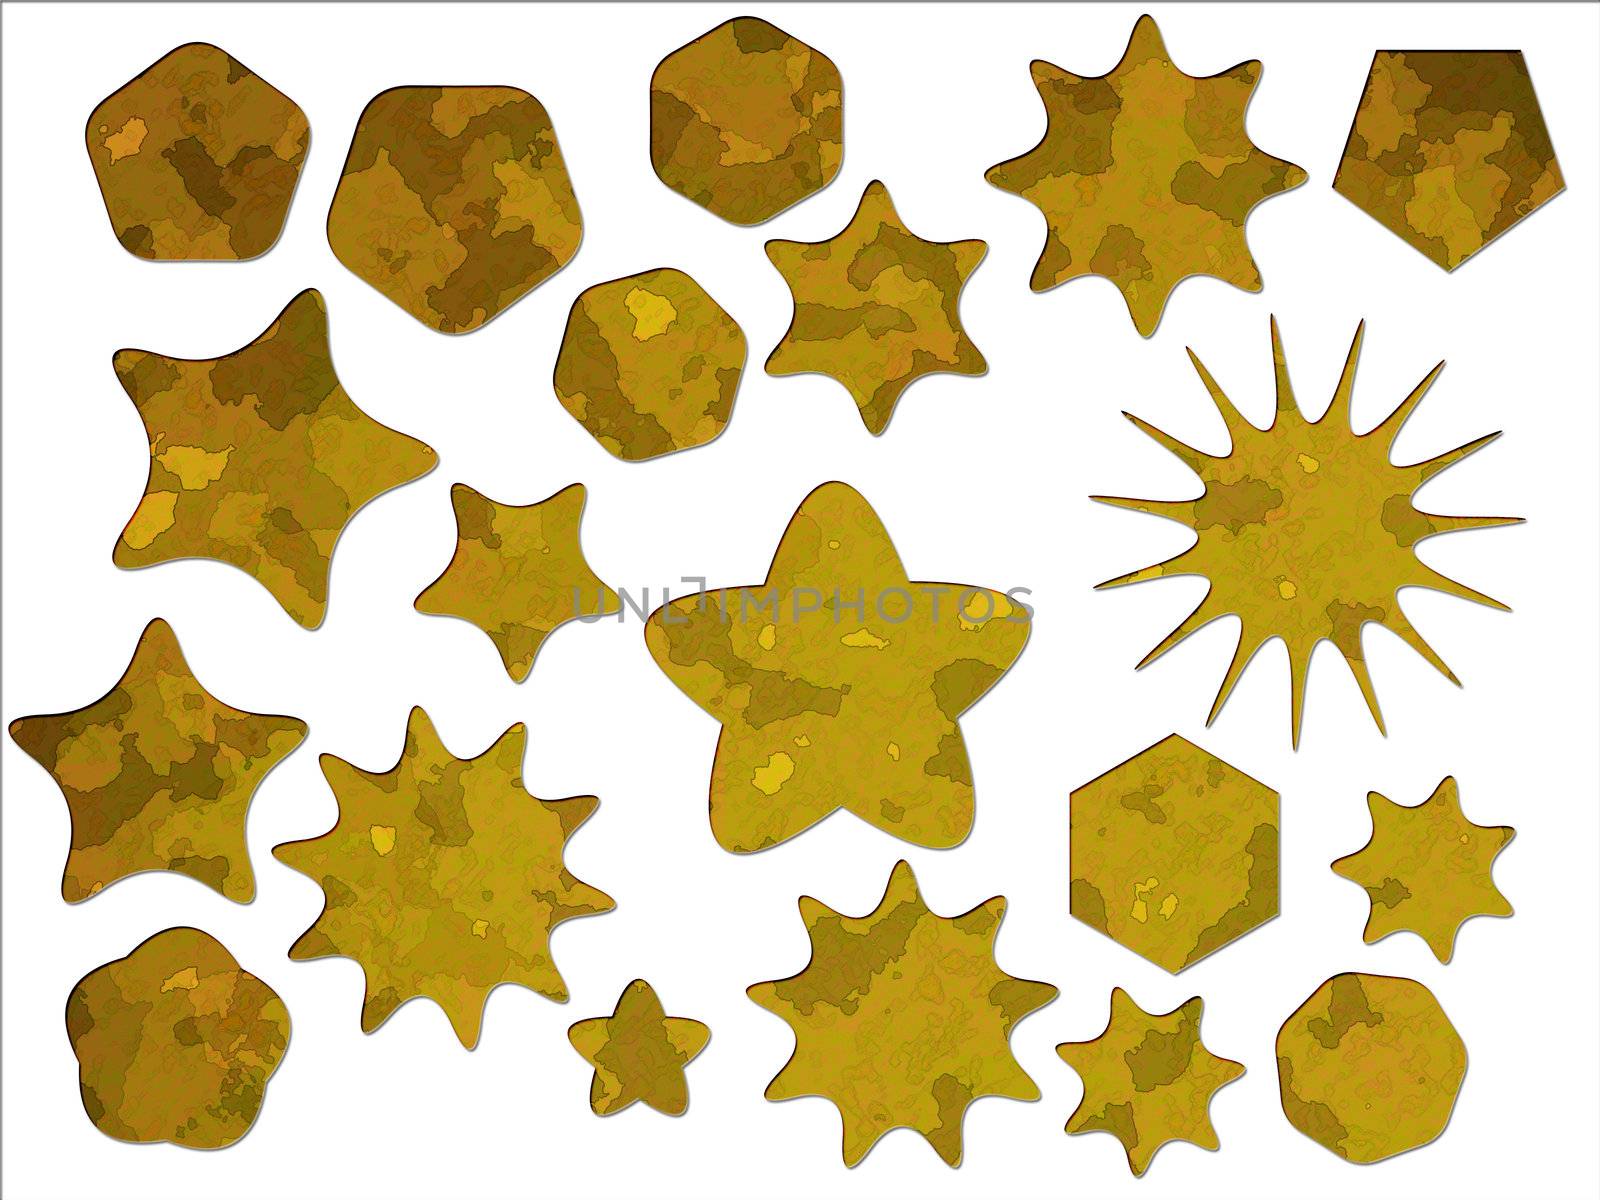 Yellow Desert Military Camouflage Effect Special Offer Star and Badge Shapes